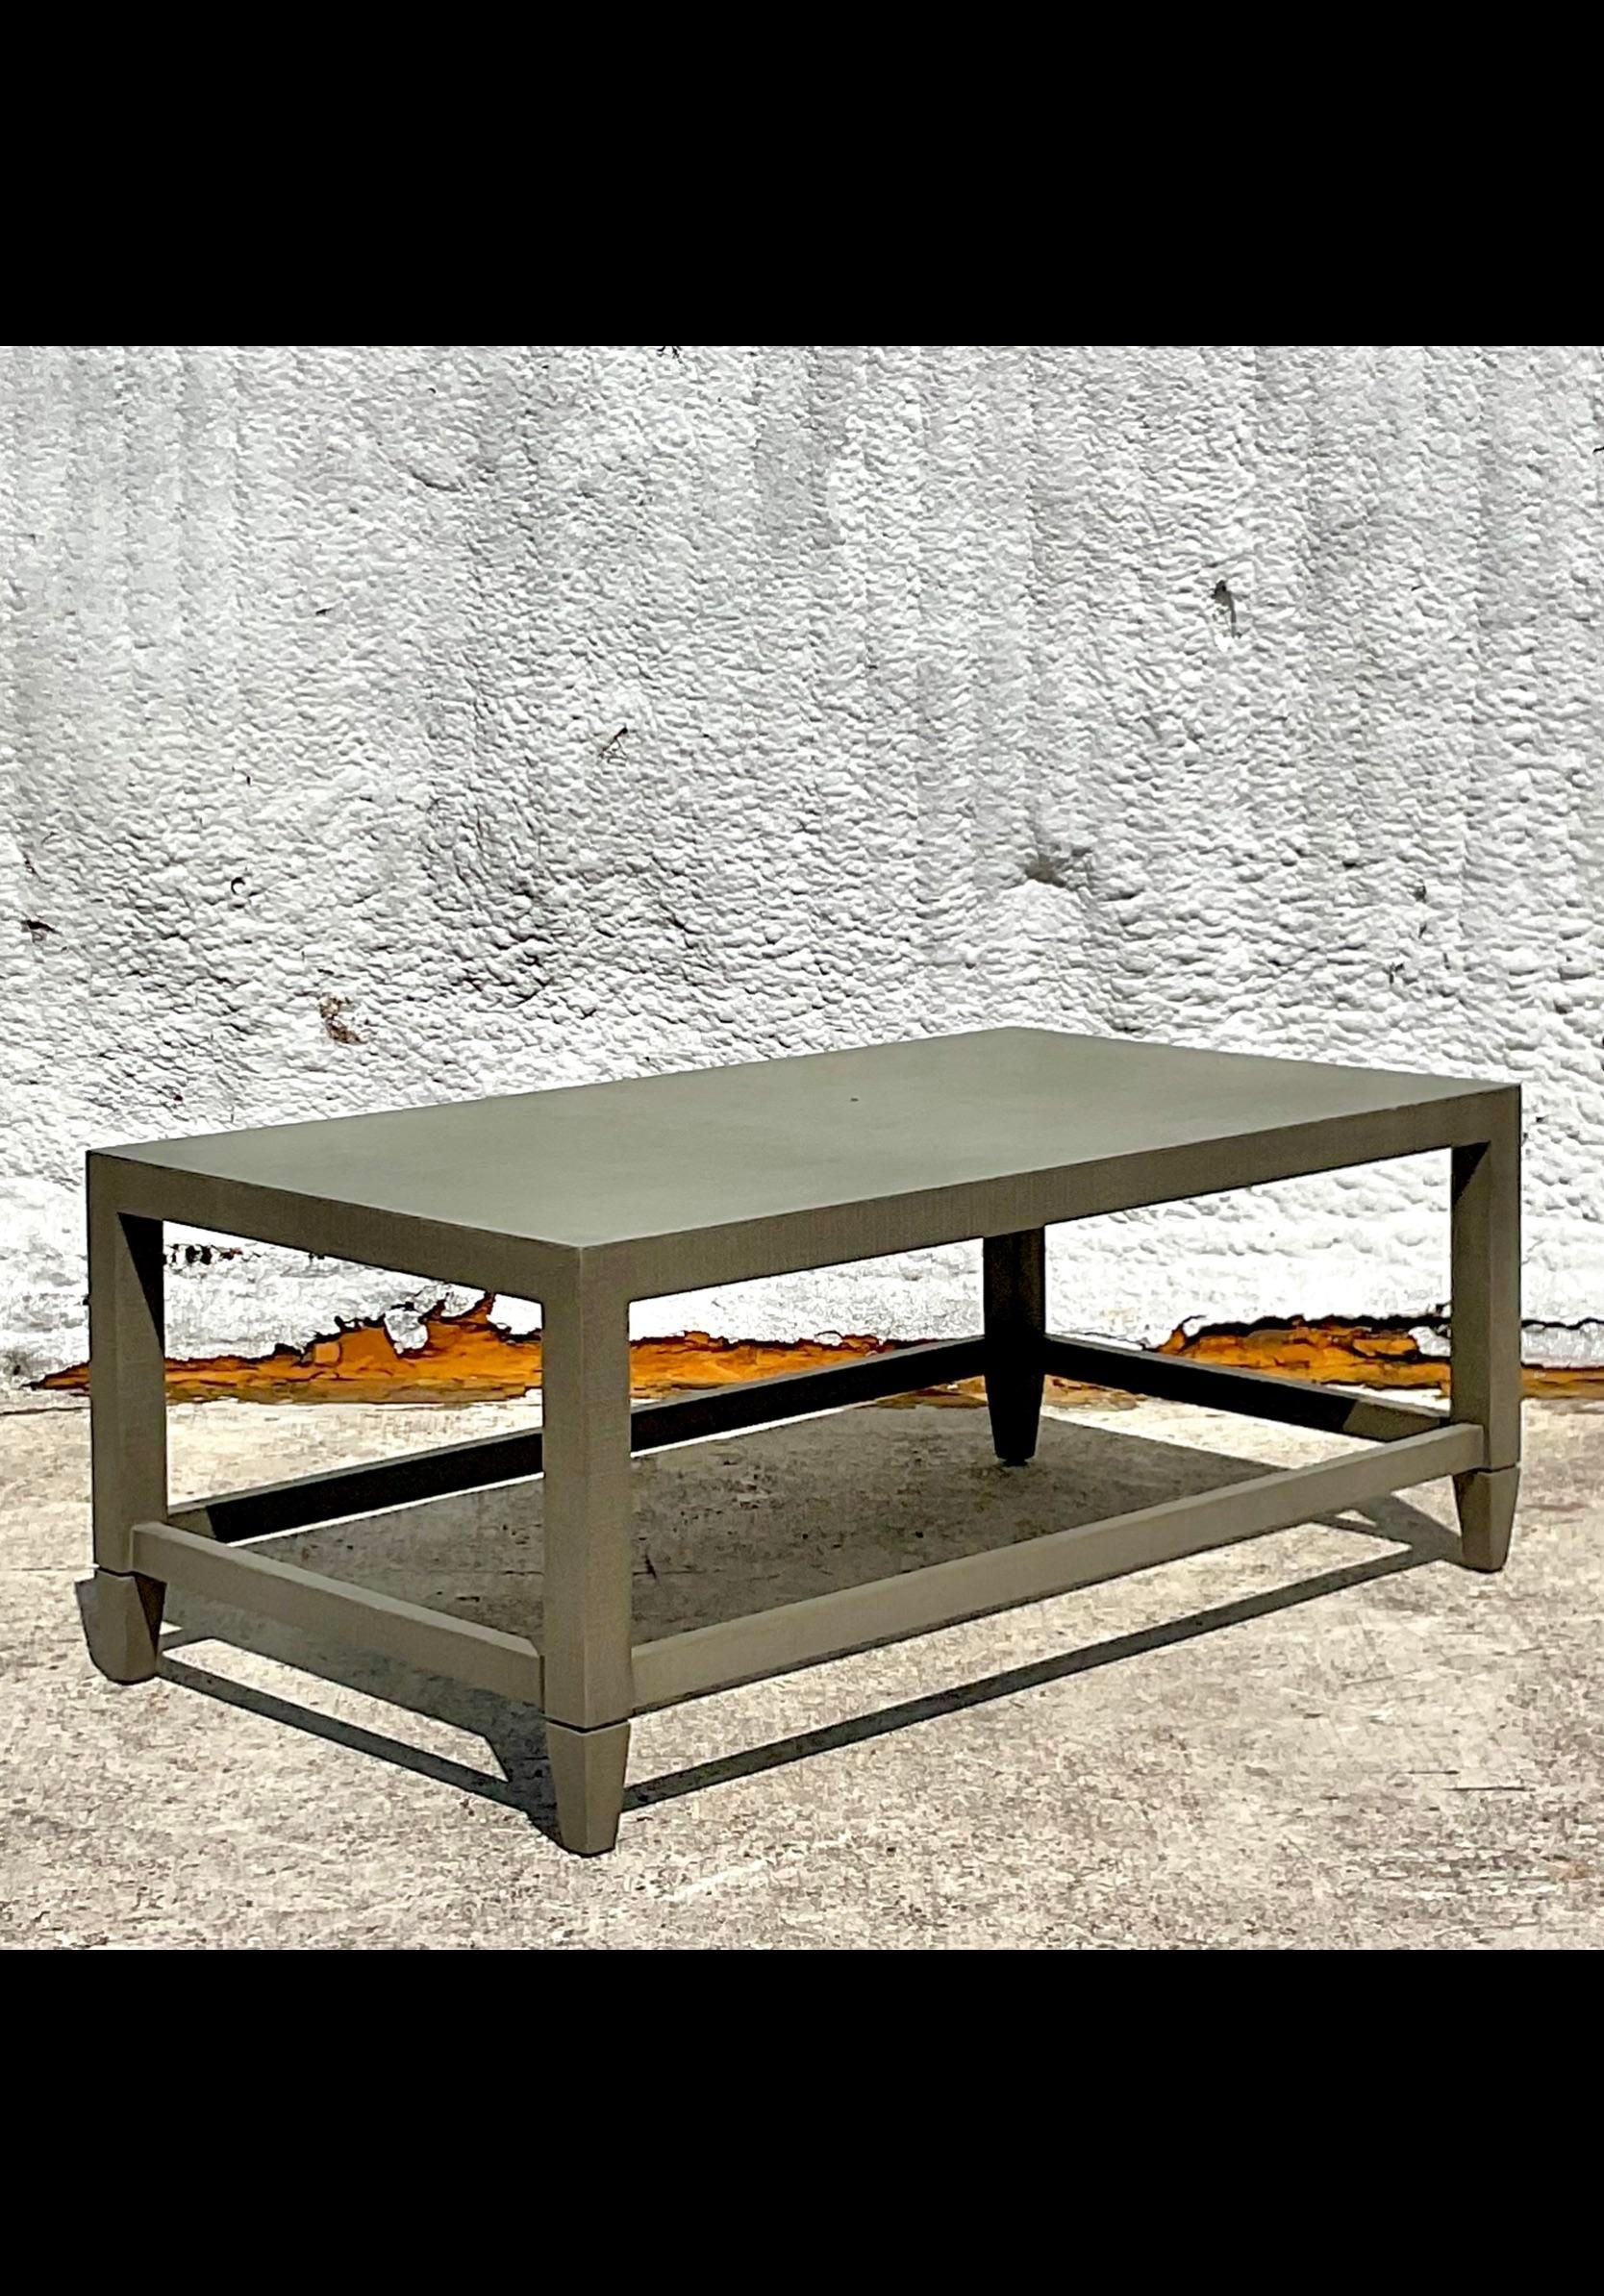 Late 20th Century Vintage Coastal Grasscloth Coffee Table In Good Condition For Sale In west palm beach, FL